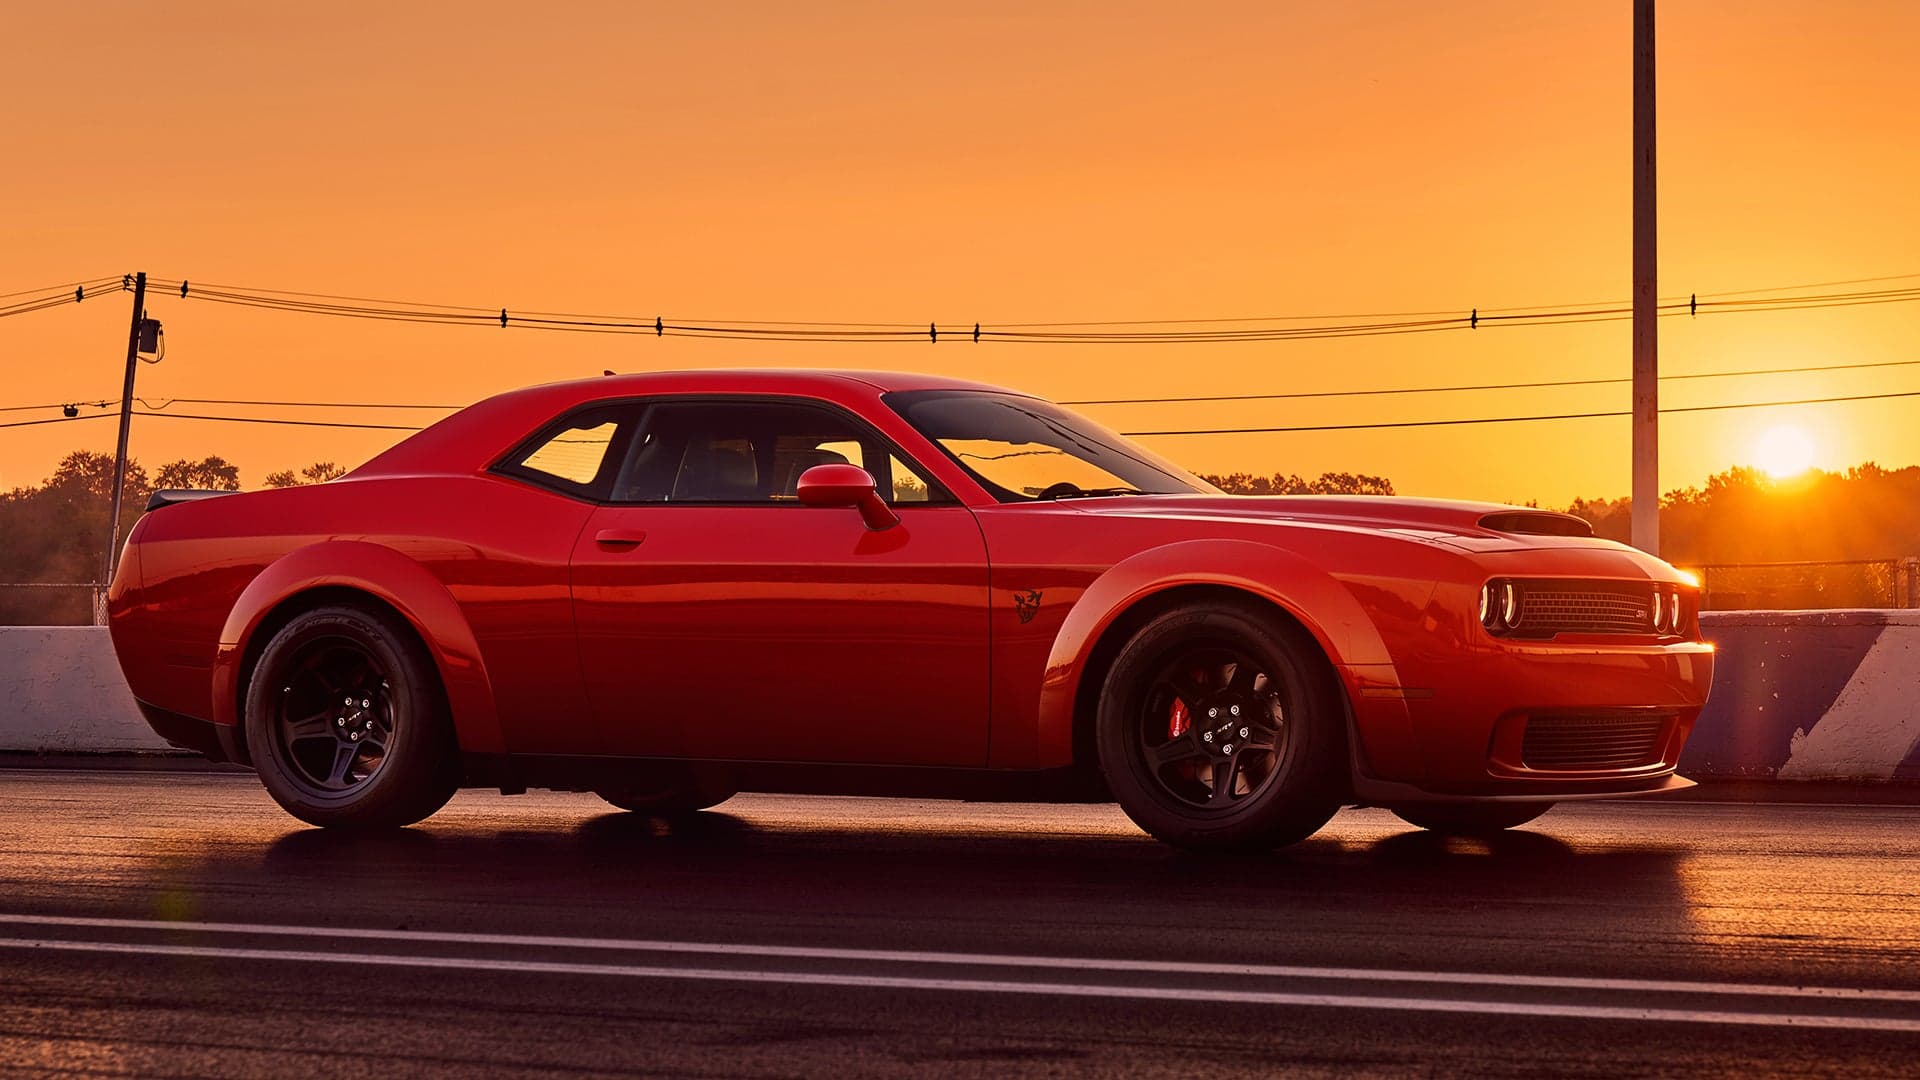 Hennessey to Boost Dodge Challenger Demon to 1,500 HP, Because Hennessey